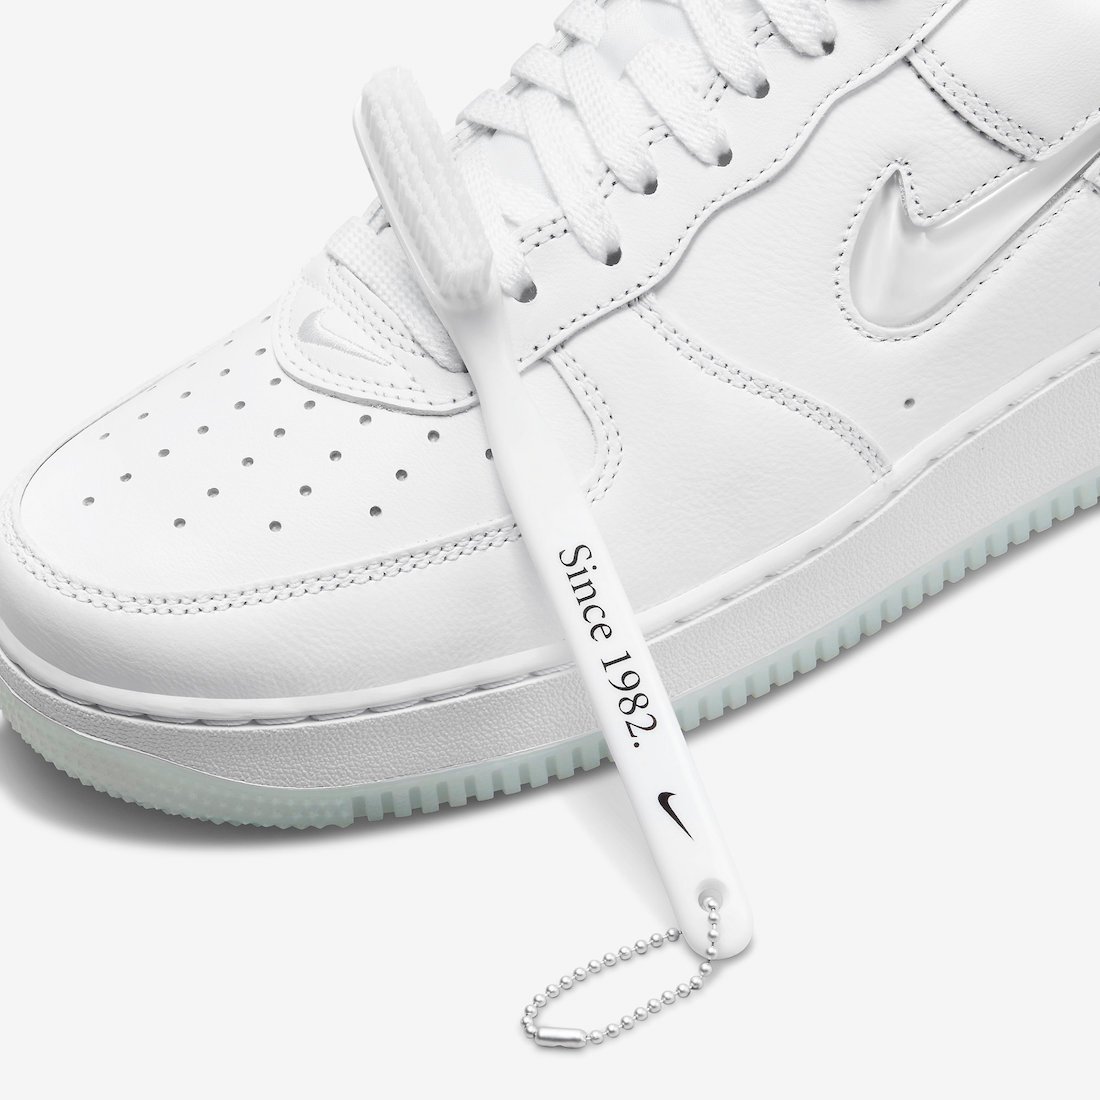 Nike Air Force 1 Low White Jewel FN5924-100 Release Date Info